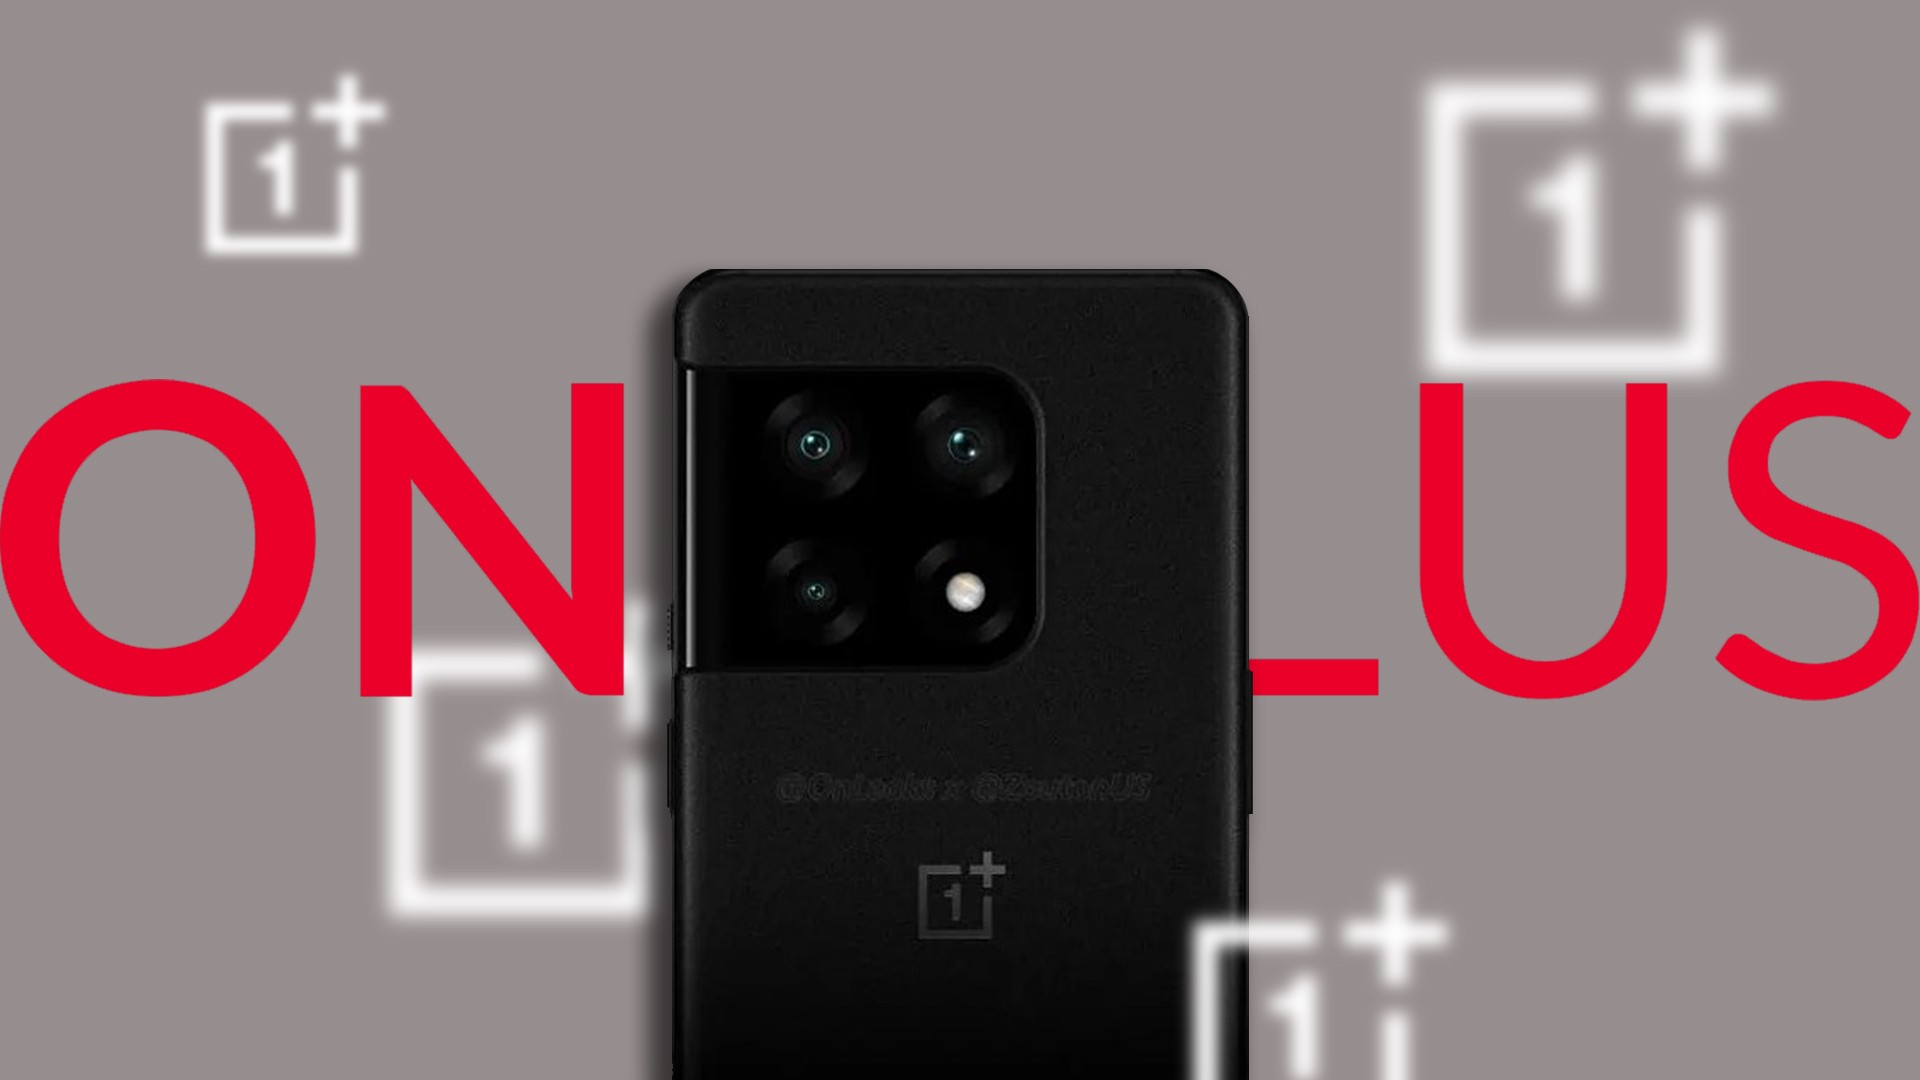 OnePlus 10 Pro has teaser released that reinforces design and suggests launch on January 11